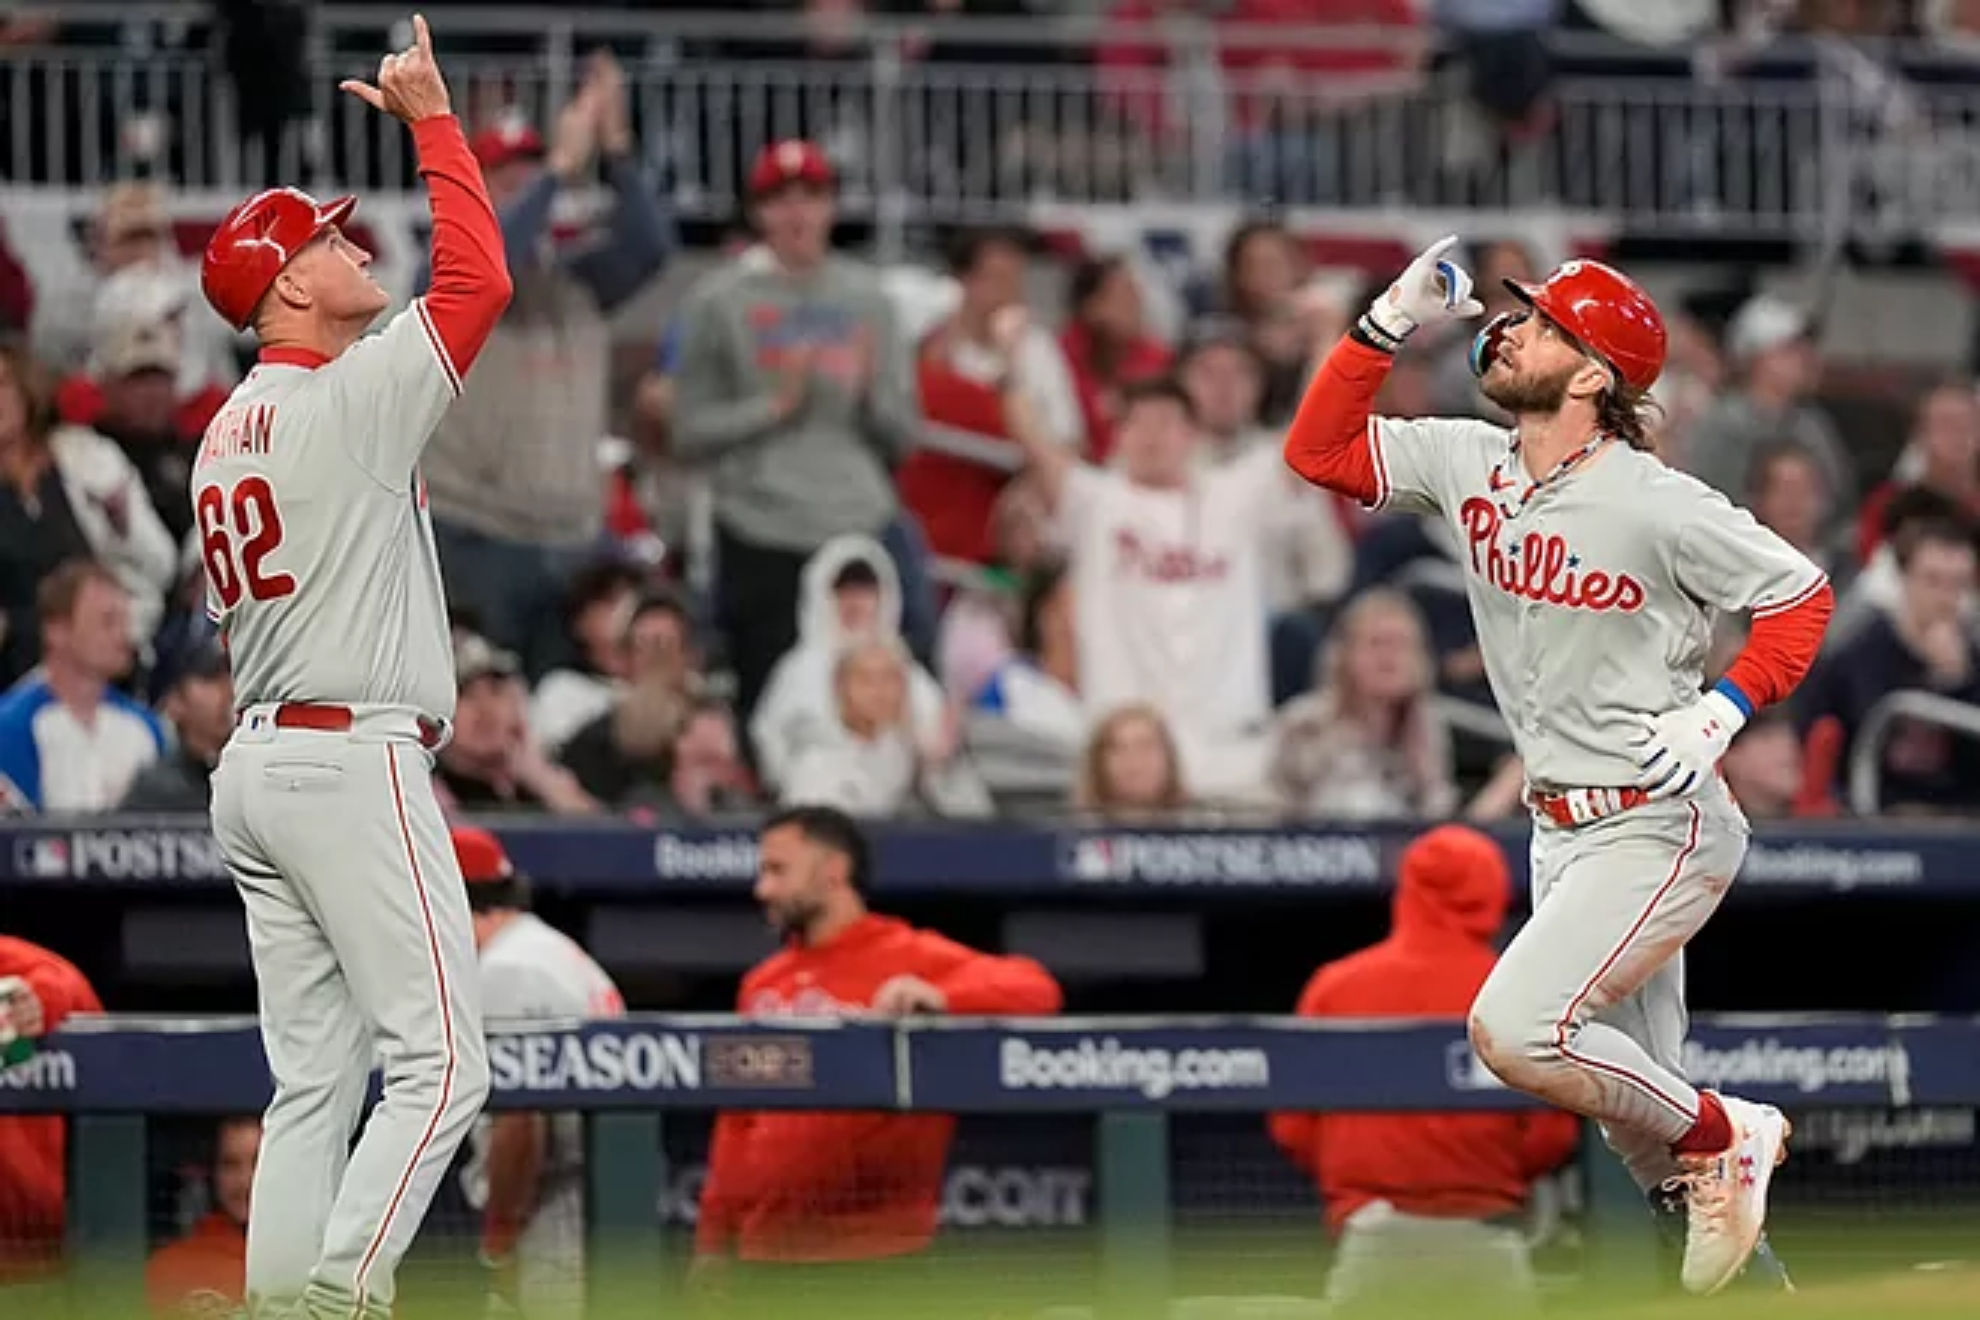 MLB Playoffs: Phillies dominate Atlanta, seize control of NL Divisional Series first best-of-five